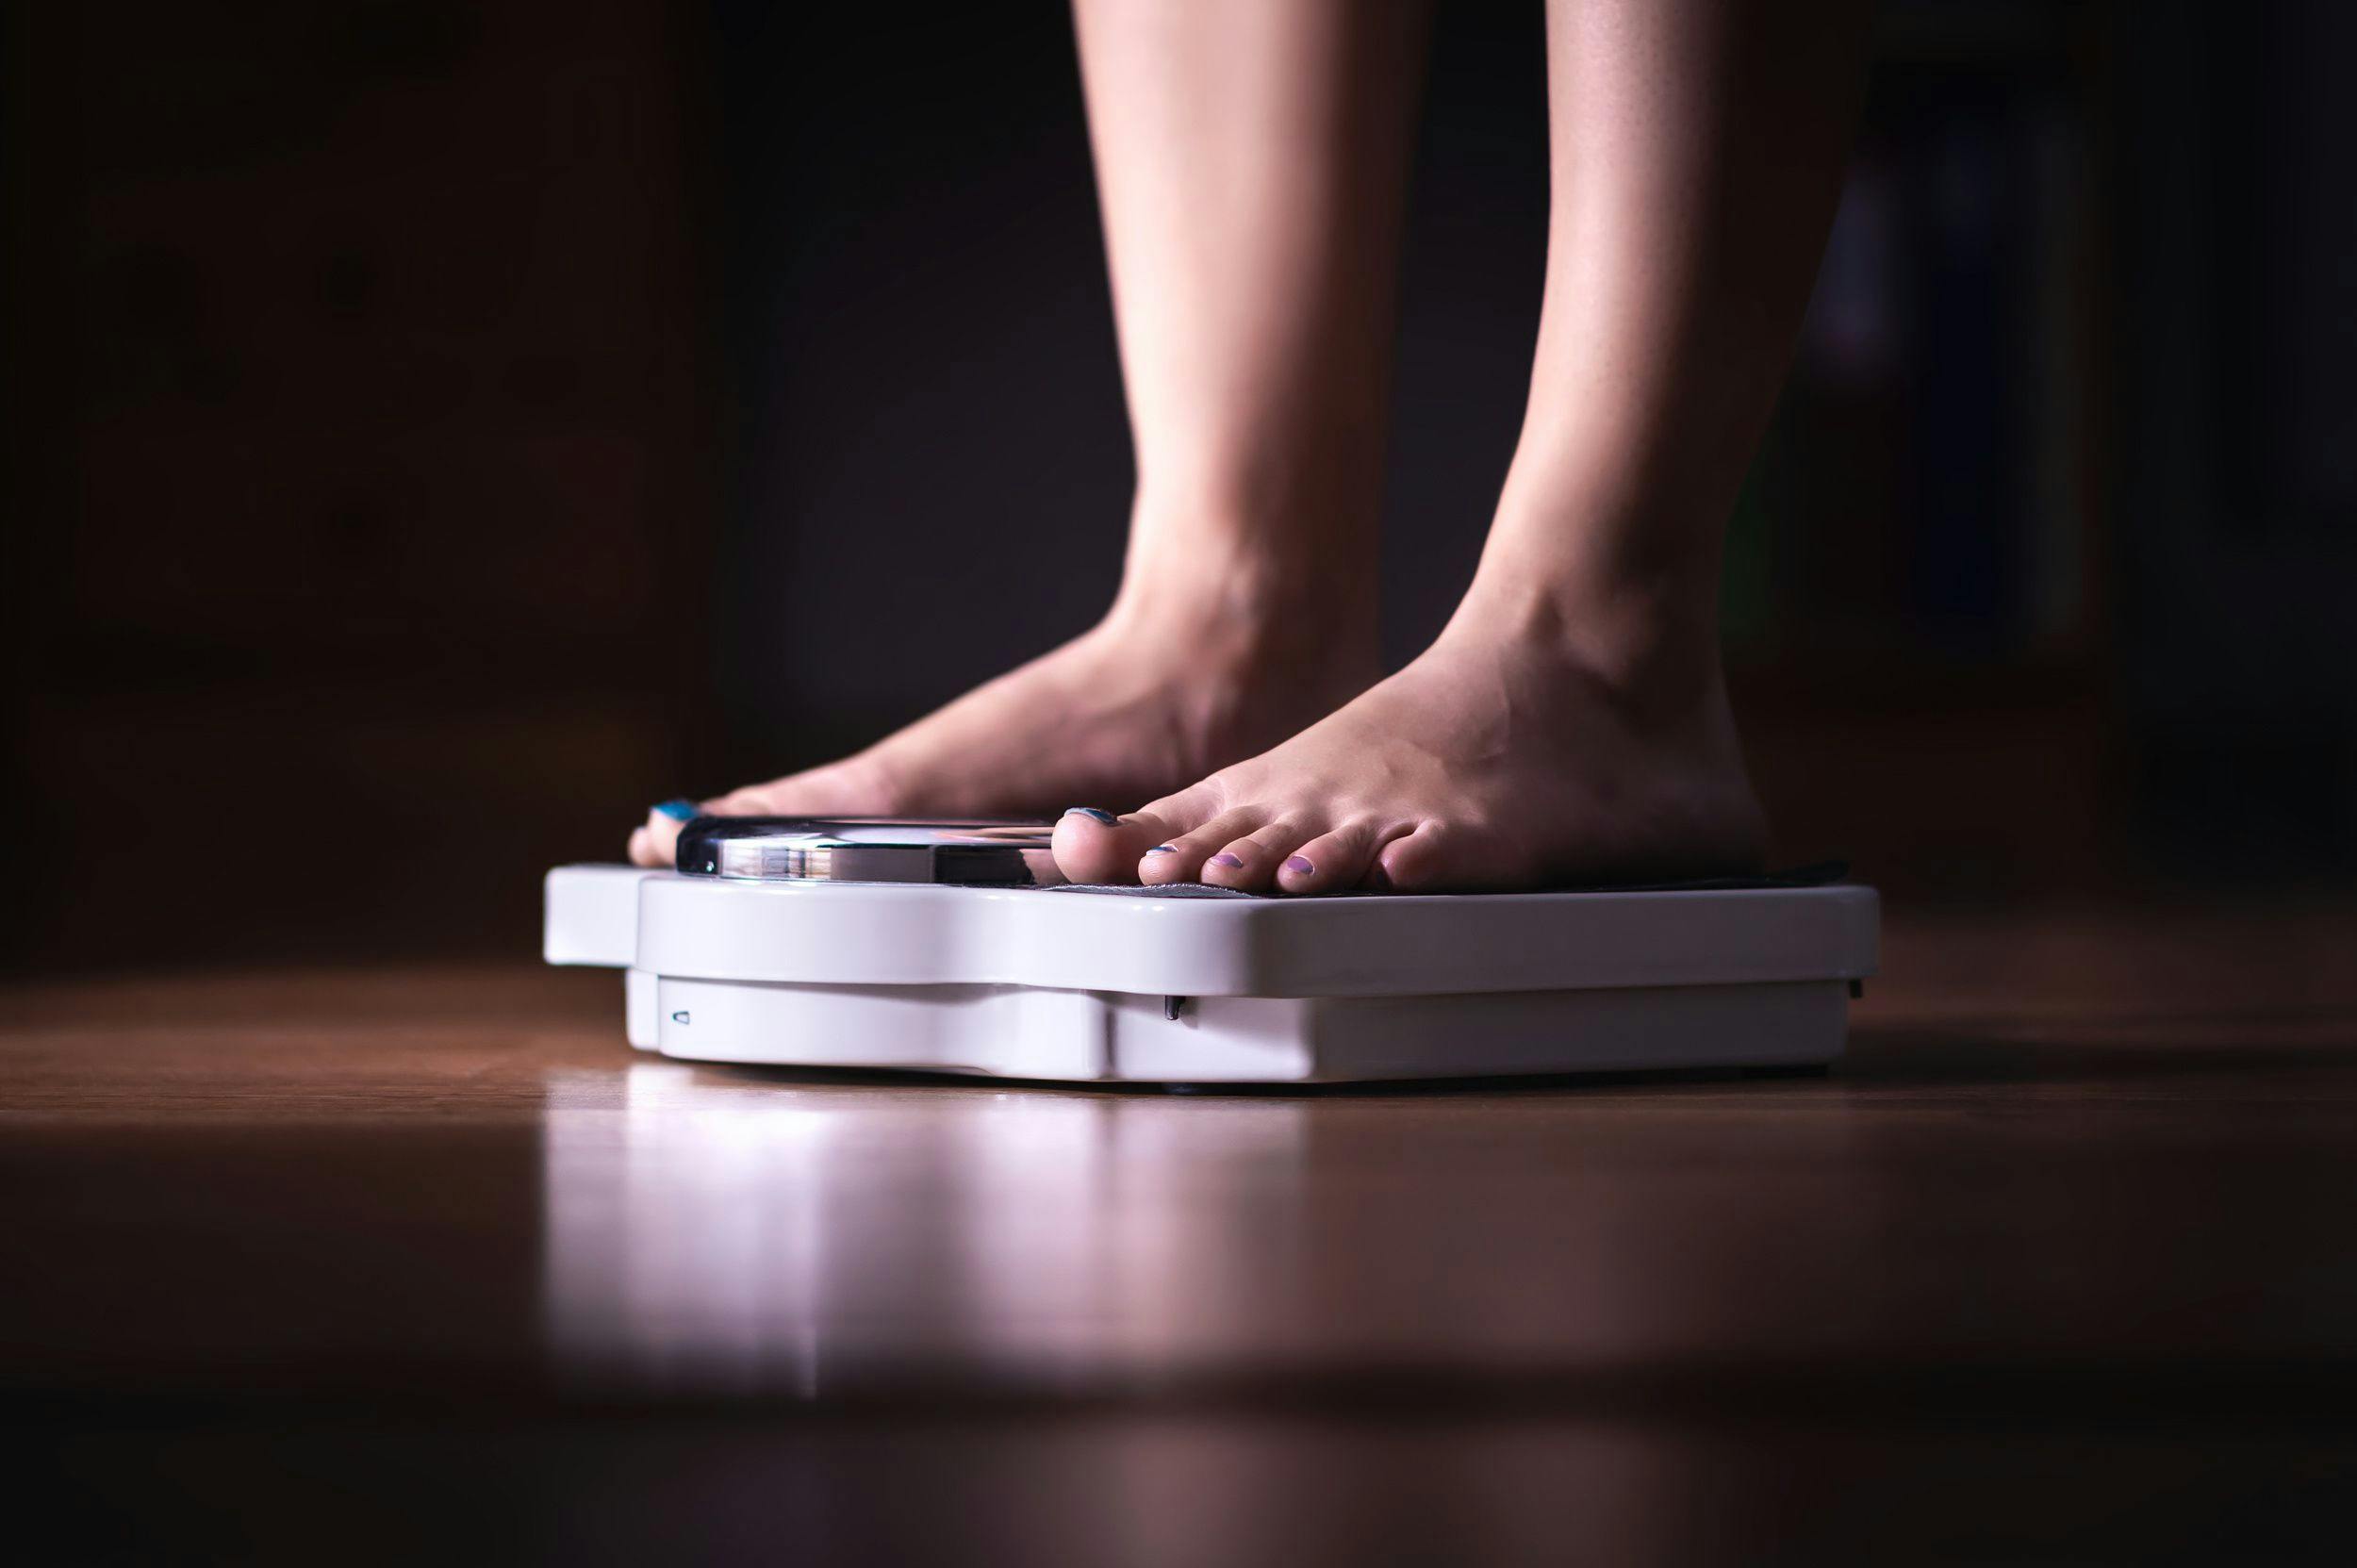 Person stepping on scale / terovesalainen - stock.adobe.com